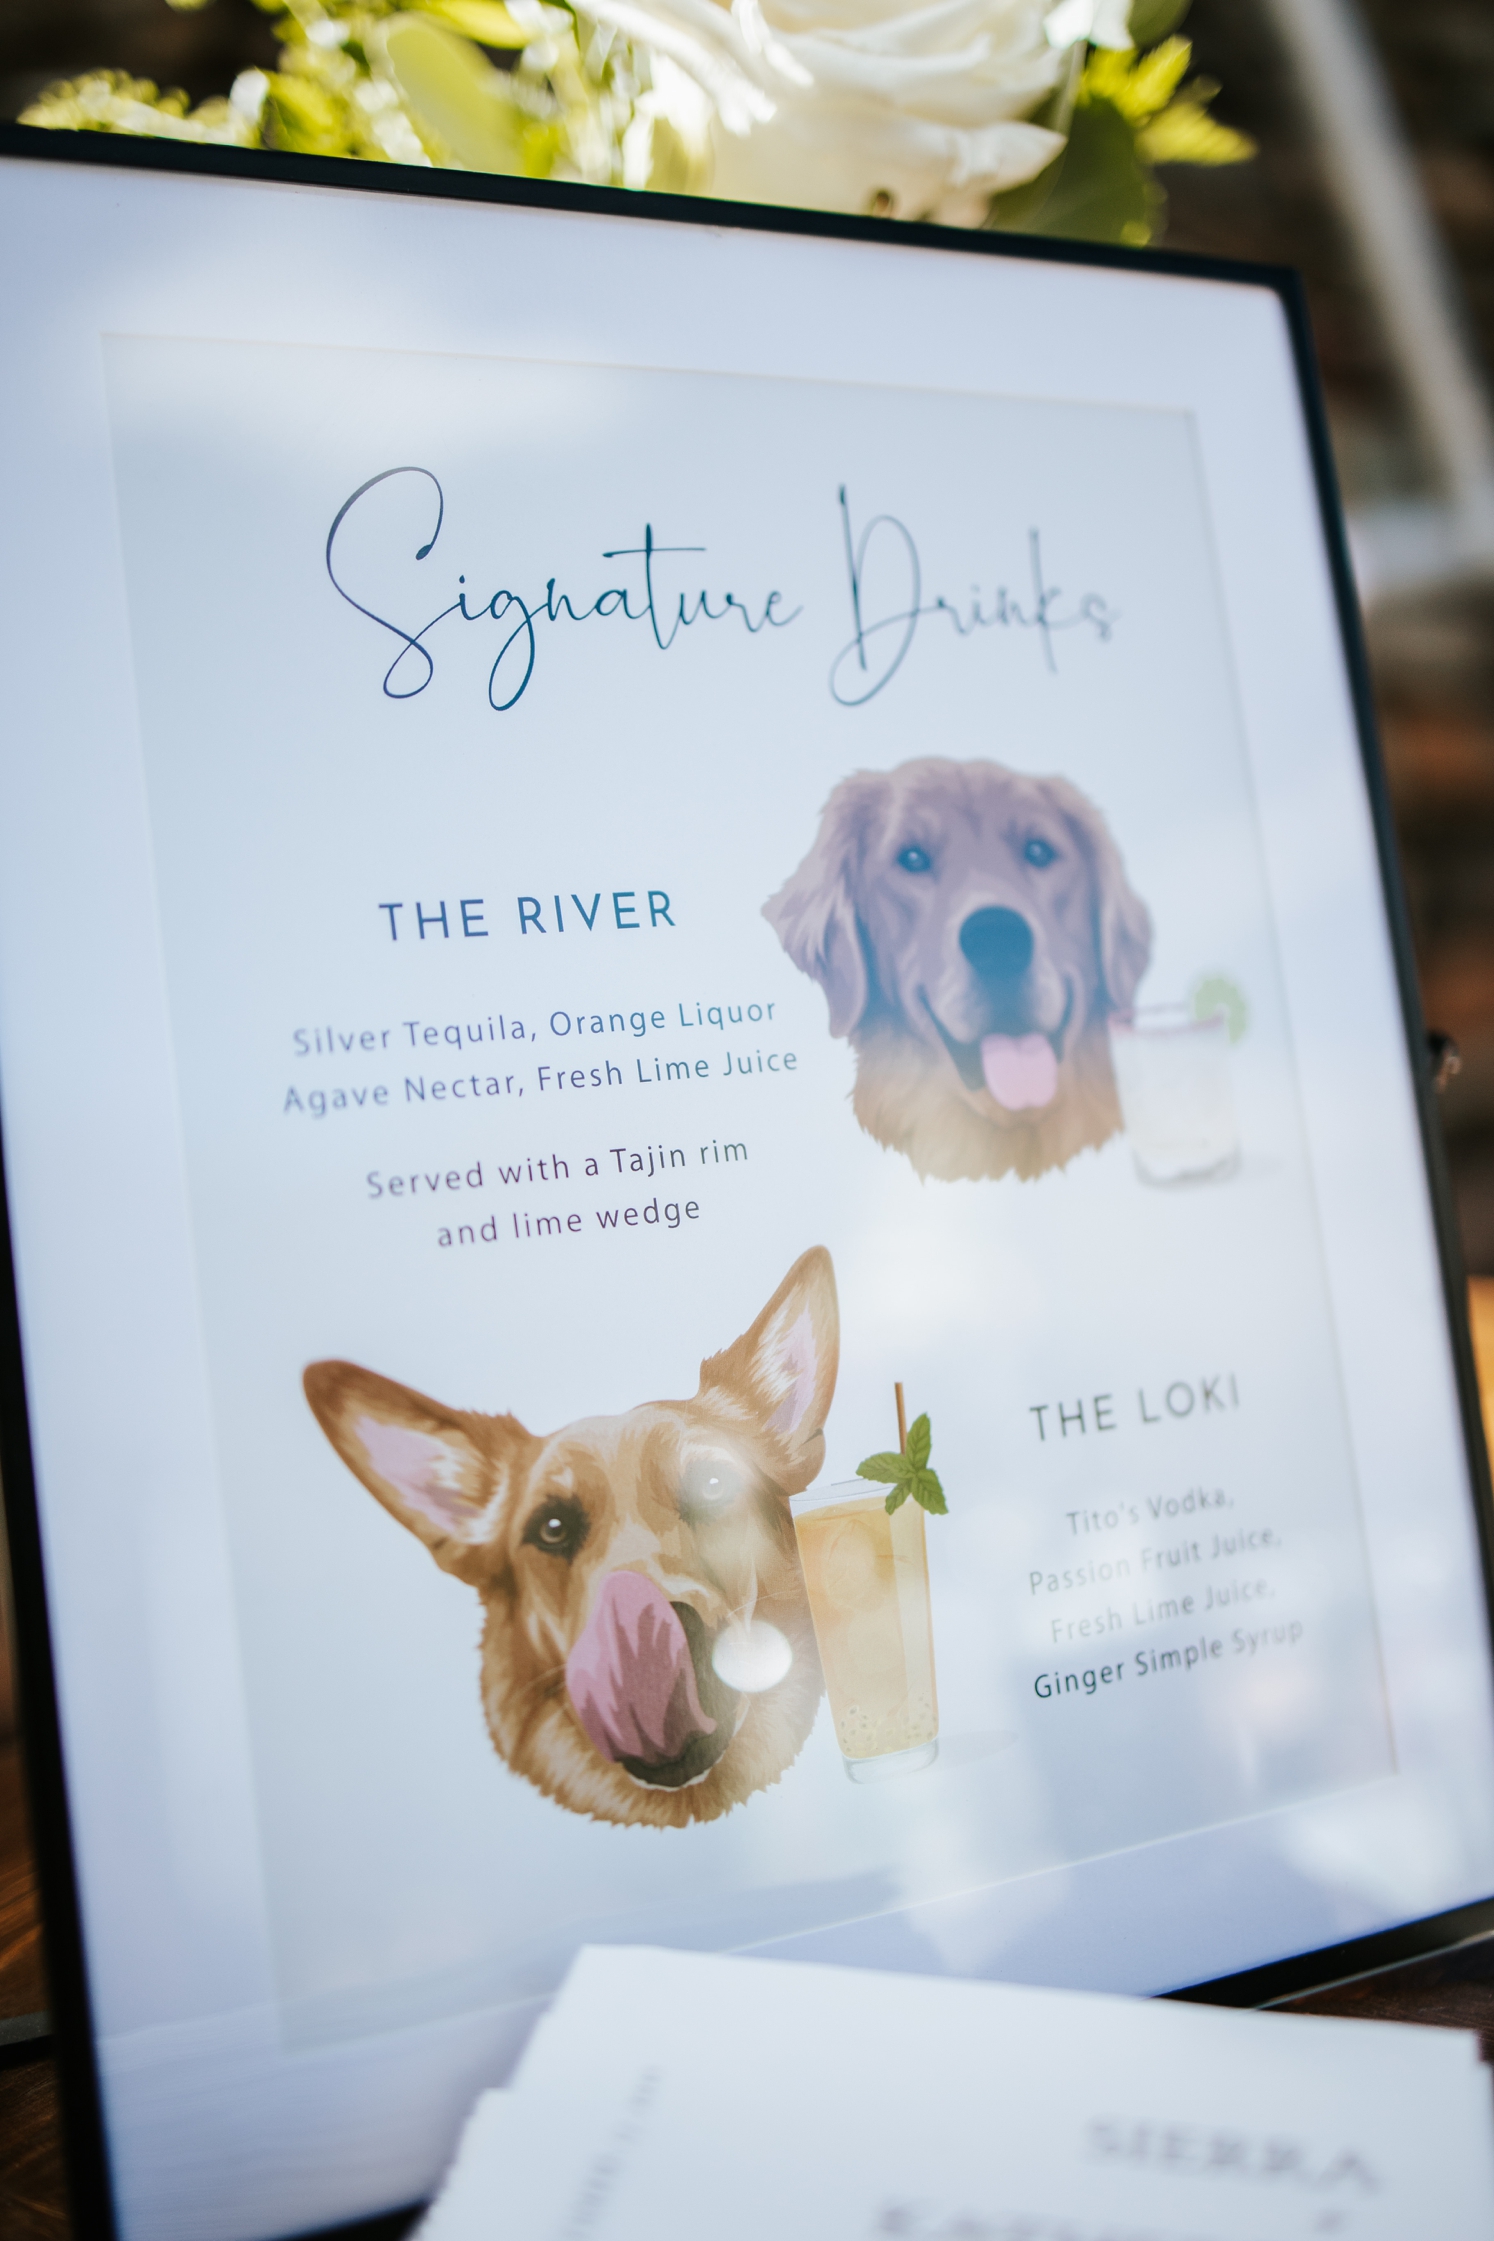 Signature drinks named after dogs at wedding reception | McArthur Weddings and Events